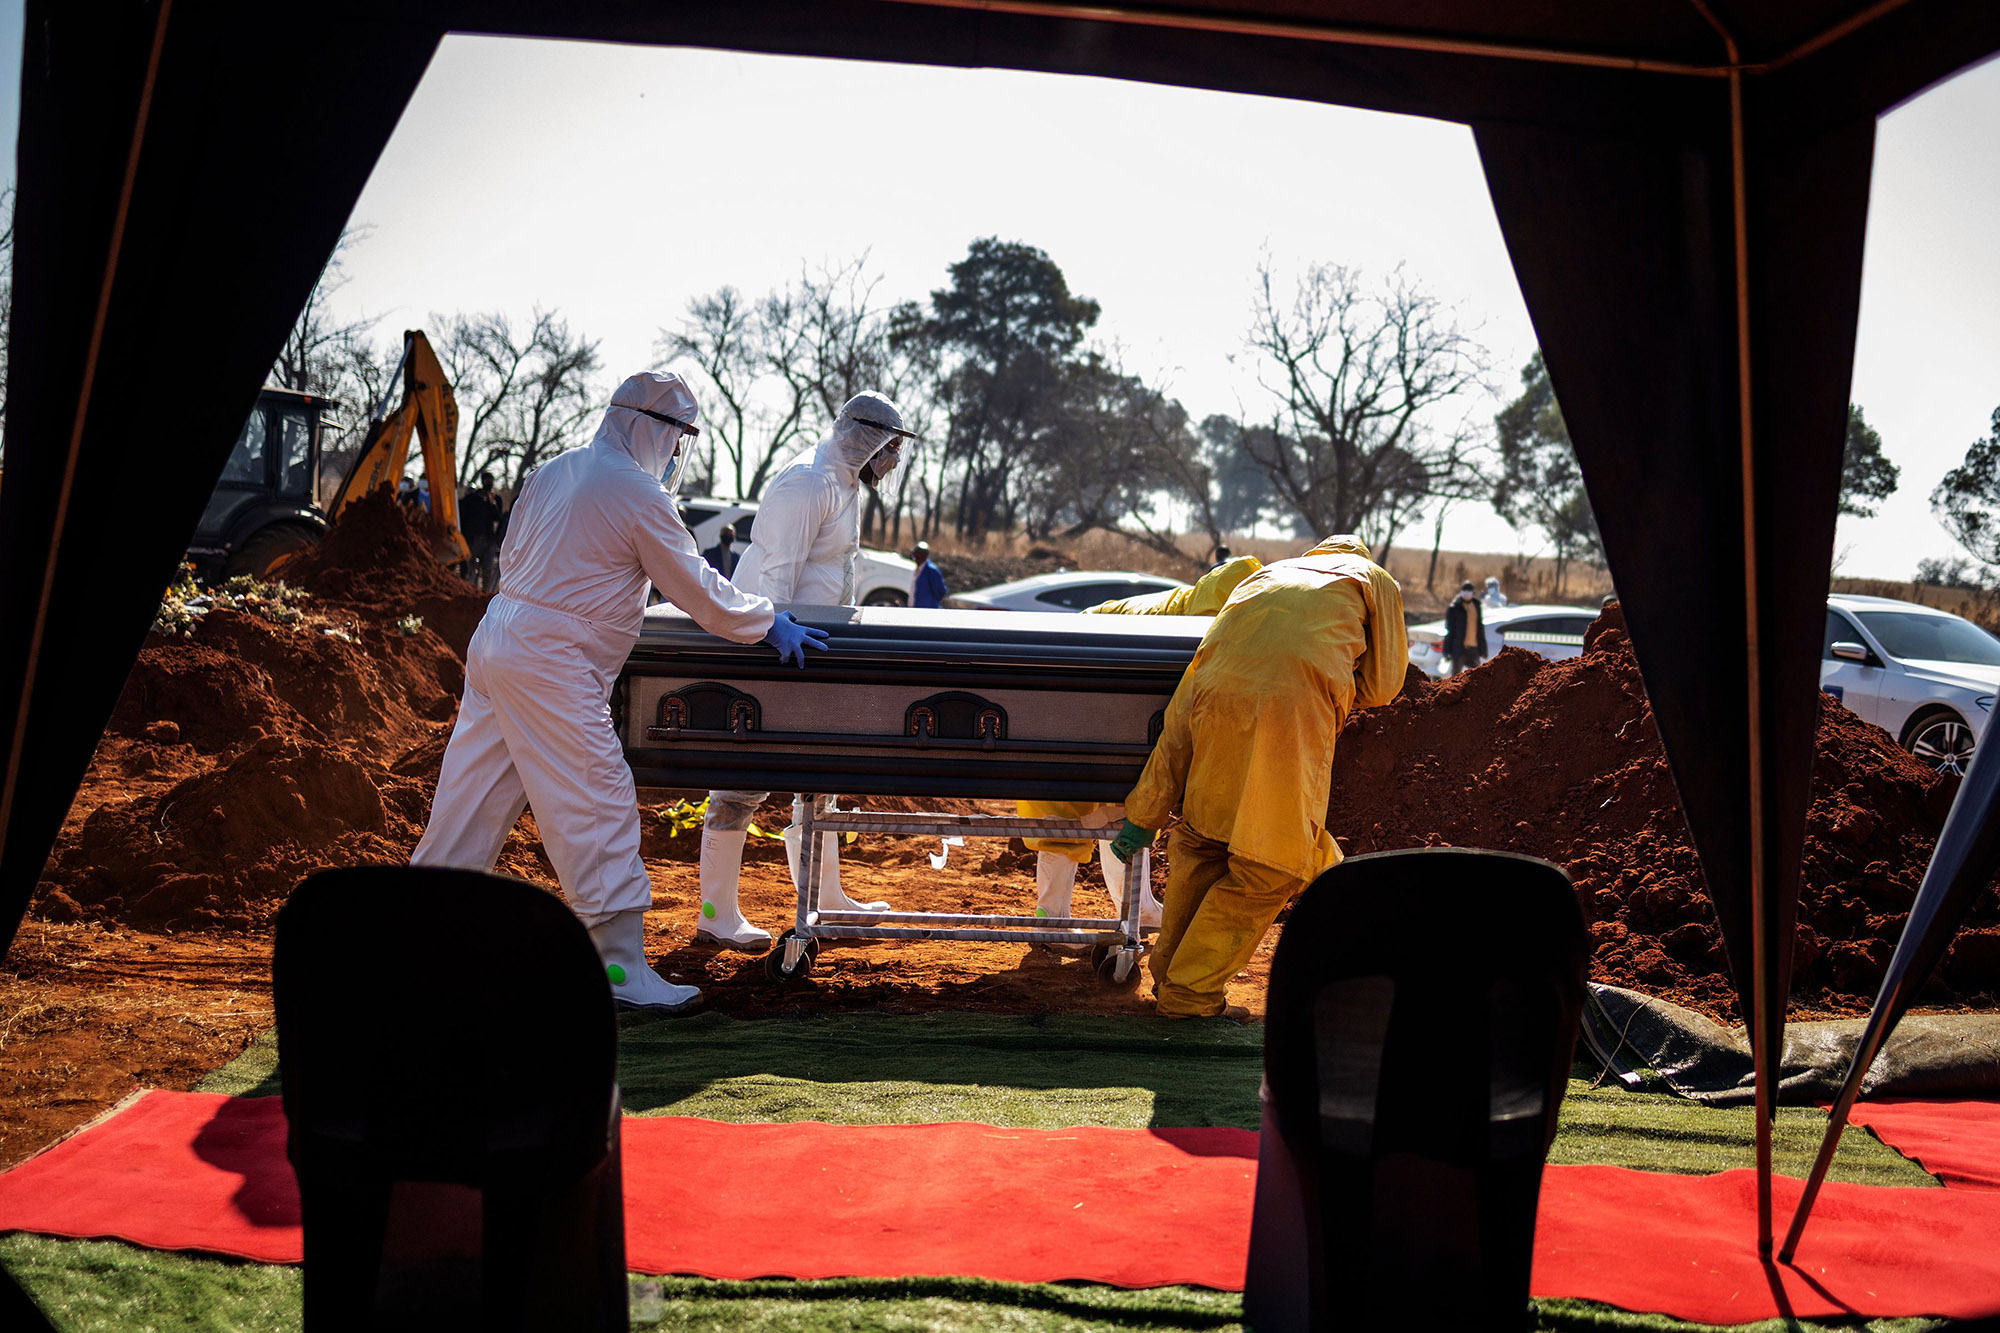 Undertakers push a casket in Soweto, on July 21.